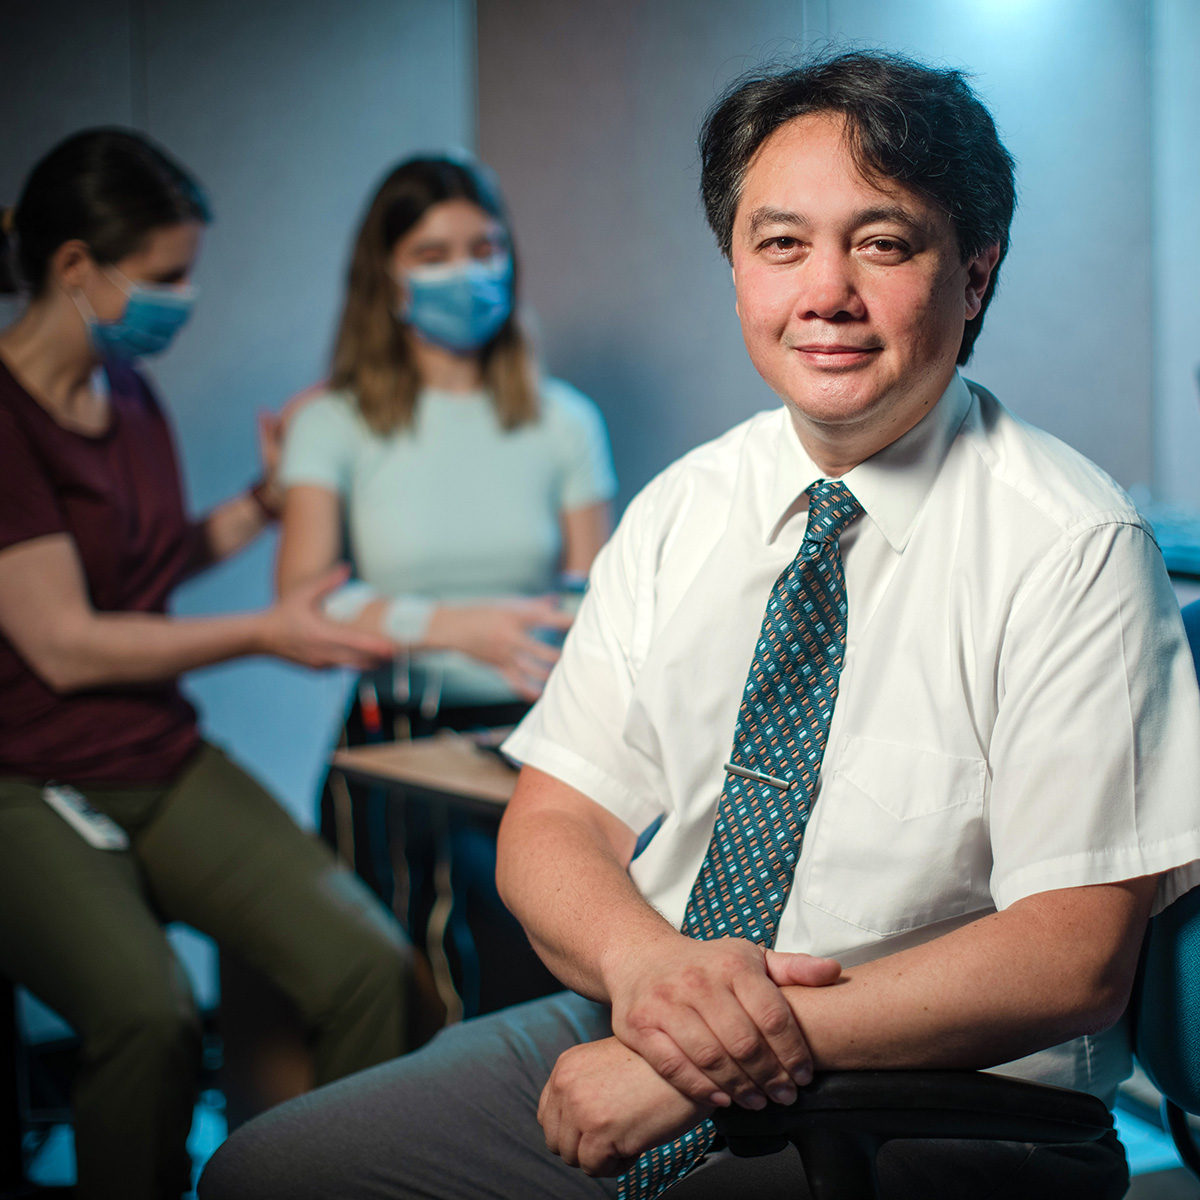 KITE scientist Dr. Cesar Marquez-Chin’s research explores utilizing brain-computer-interface and functional electrical stimulation to restore movement in paralyzed patients. Learn more about it in the latest edition of our #KITEworks series: bit.ly/3Qut3th